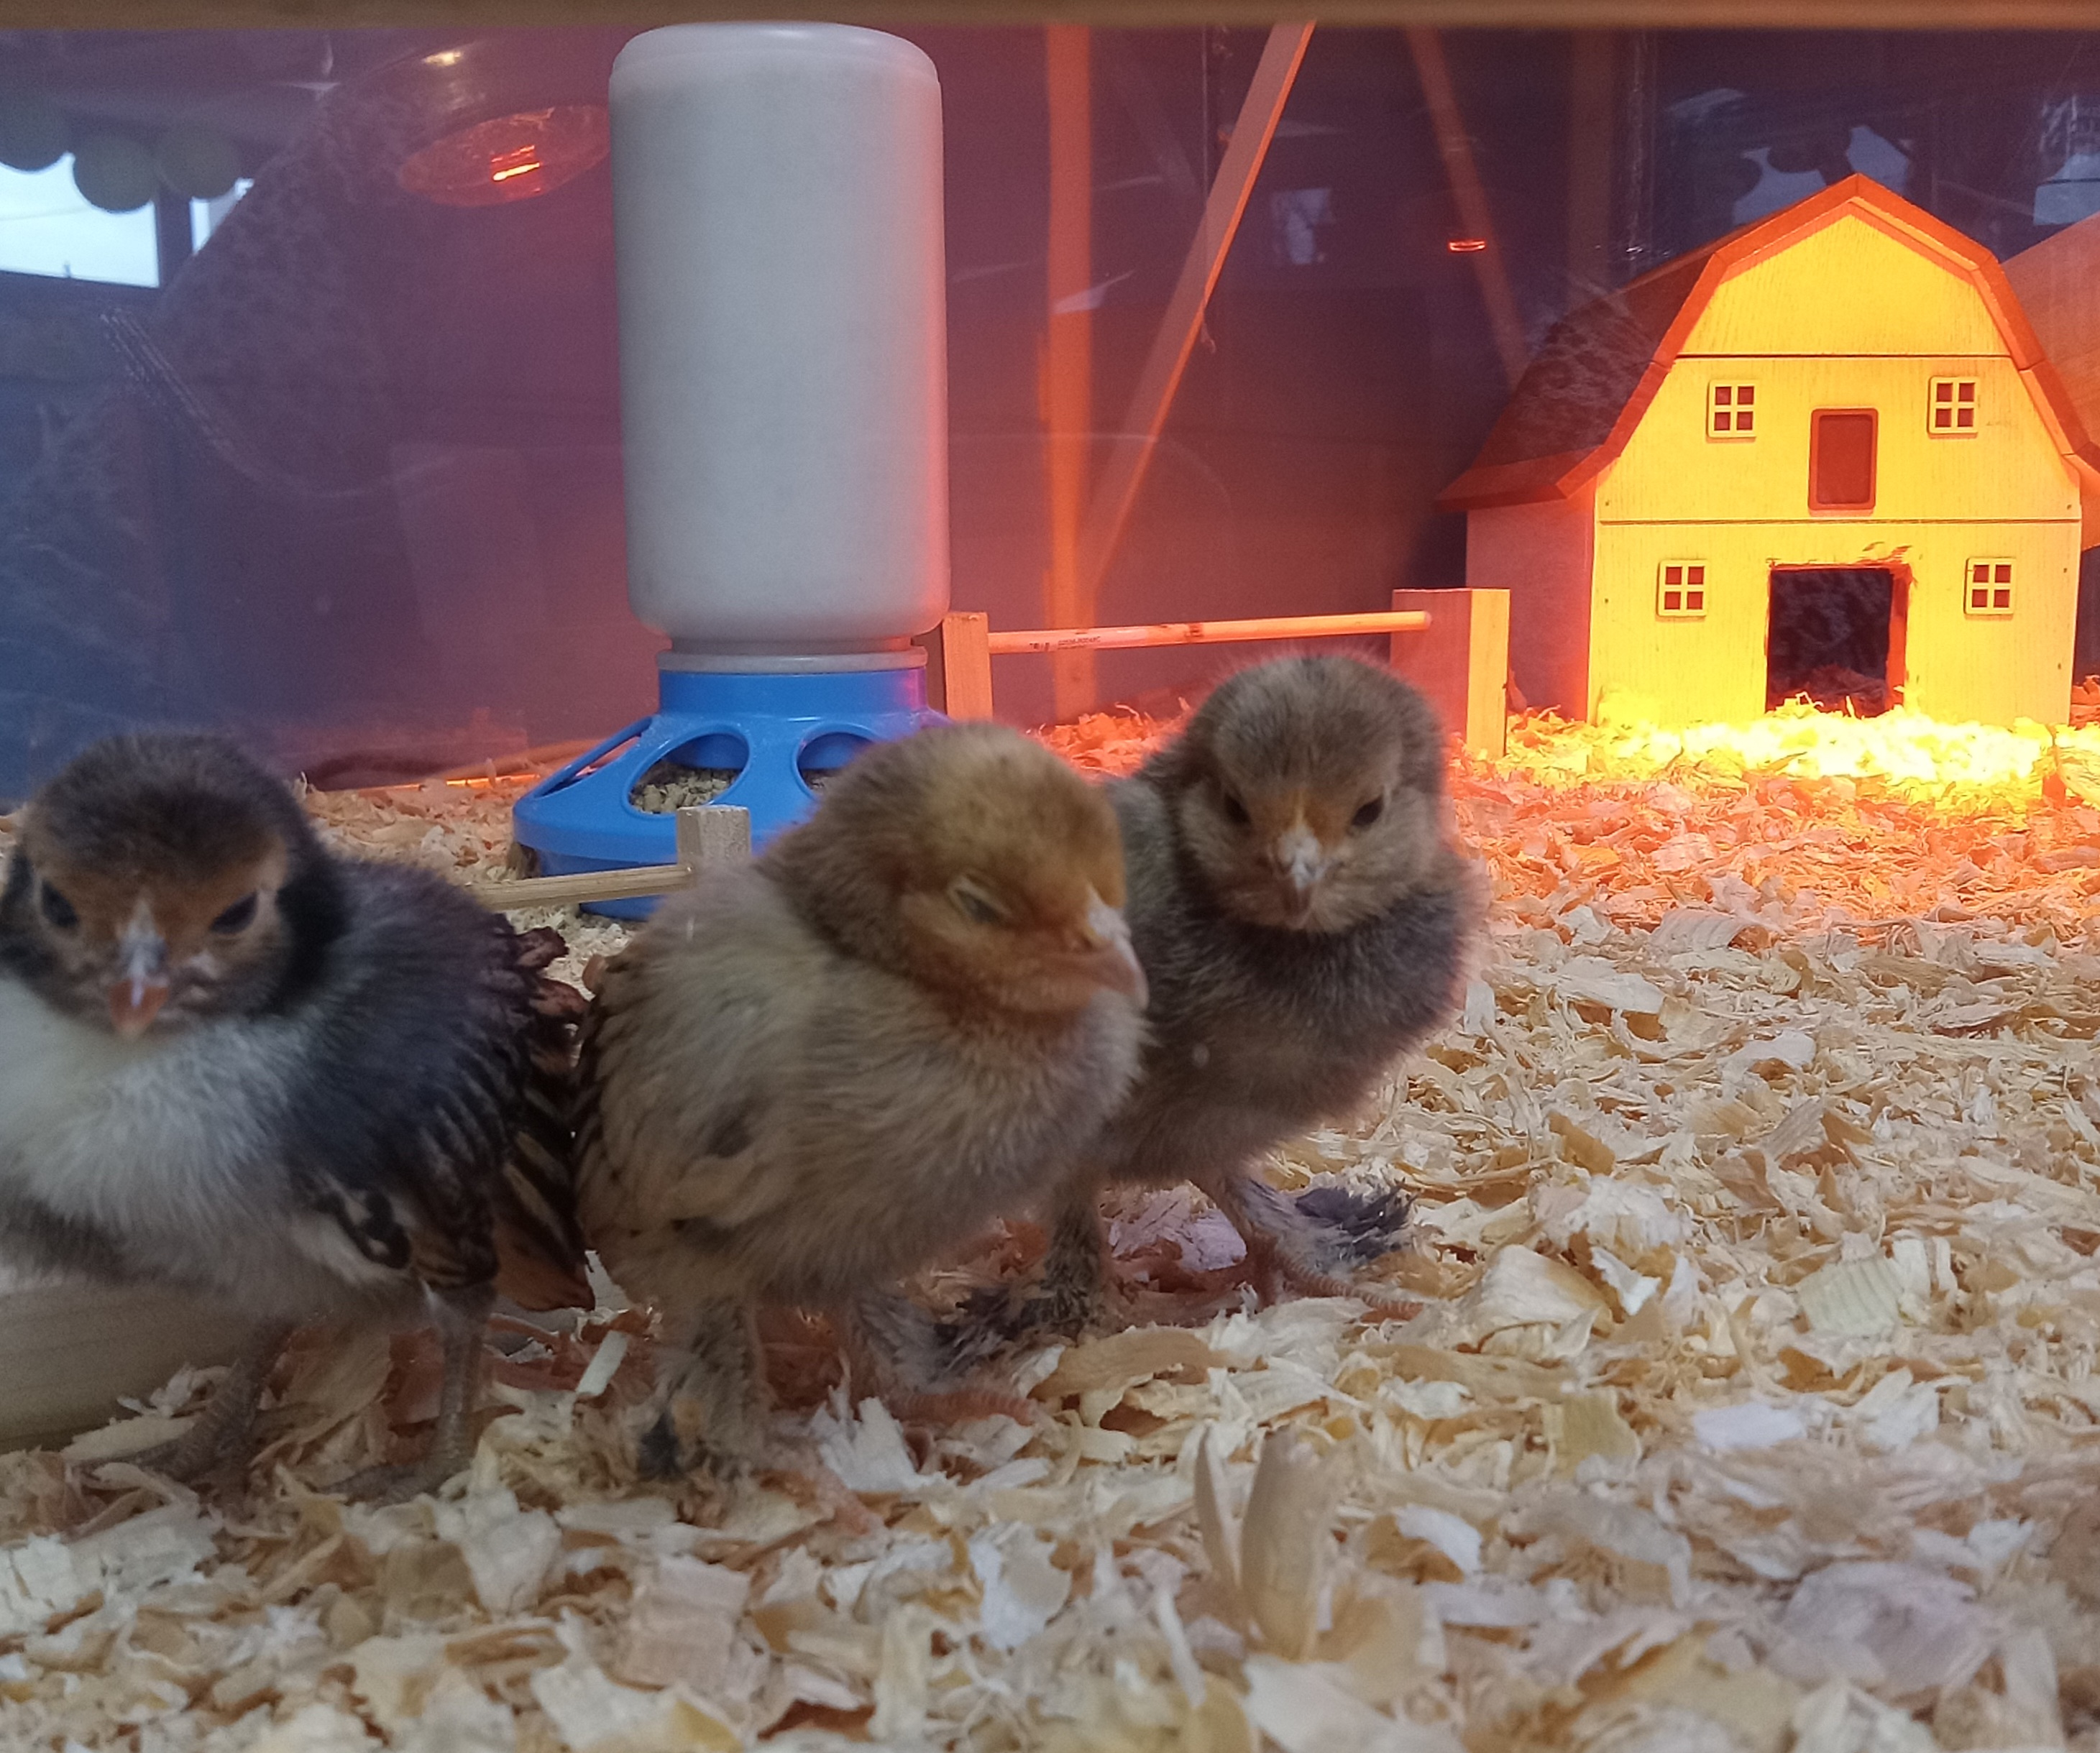 Adorable baby chicks at our library